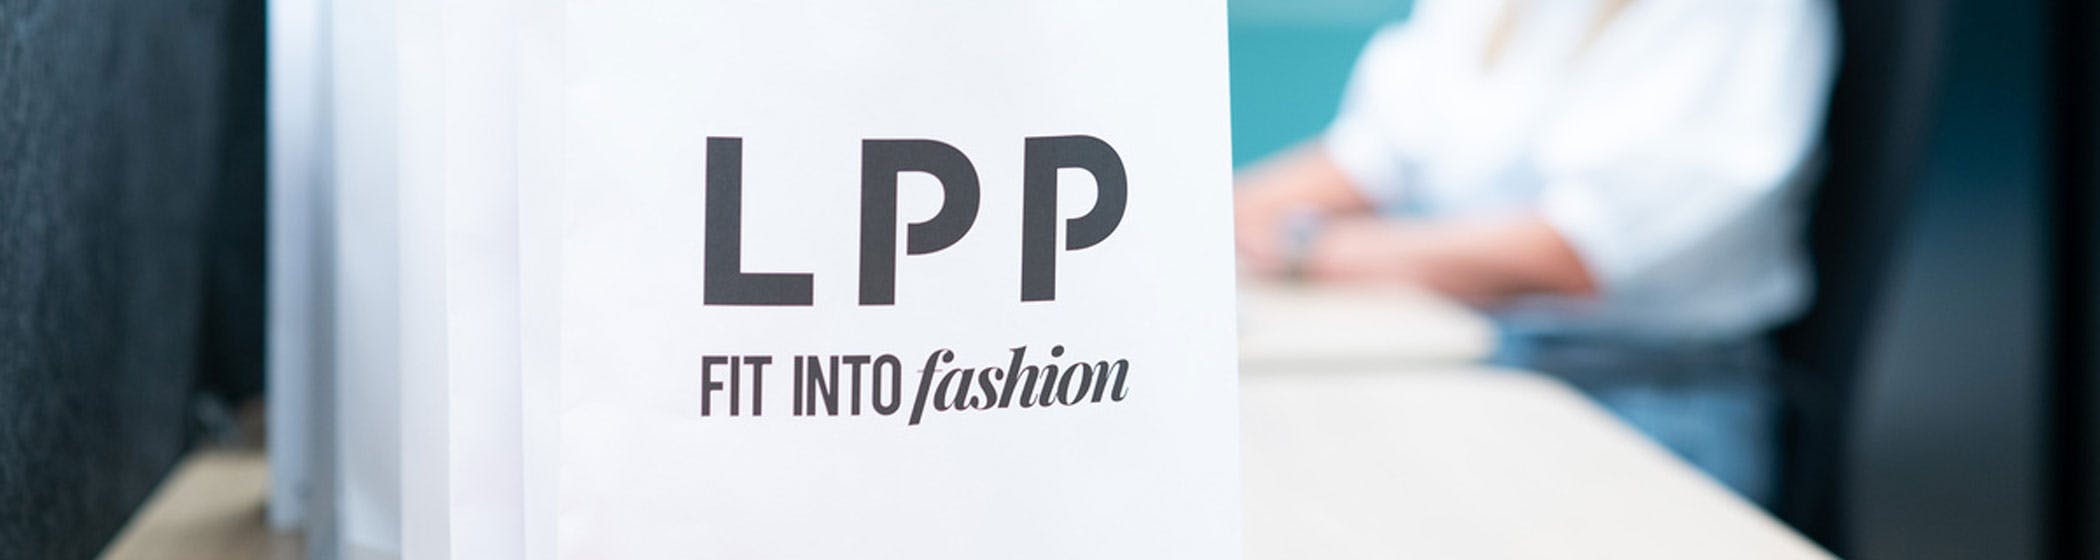 Barona recruits more than 100 people for the clothing giant LPP’s launch in Finland